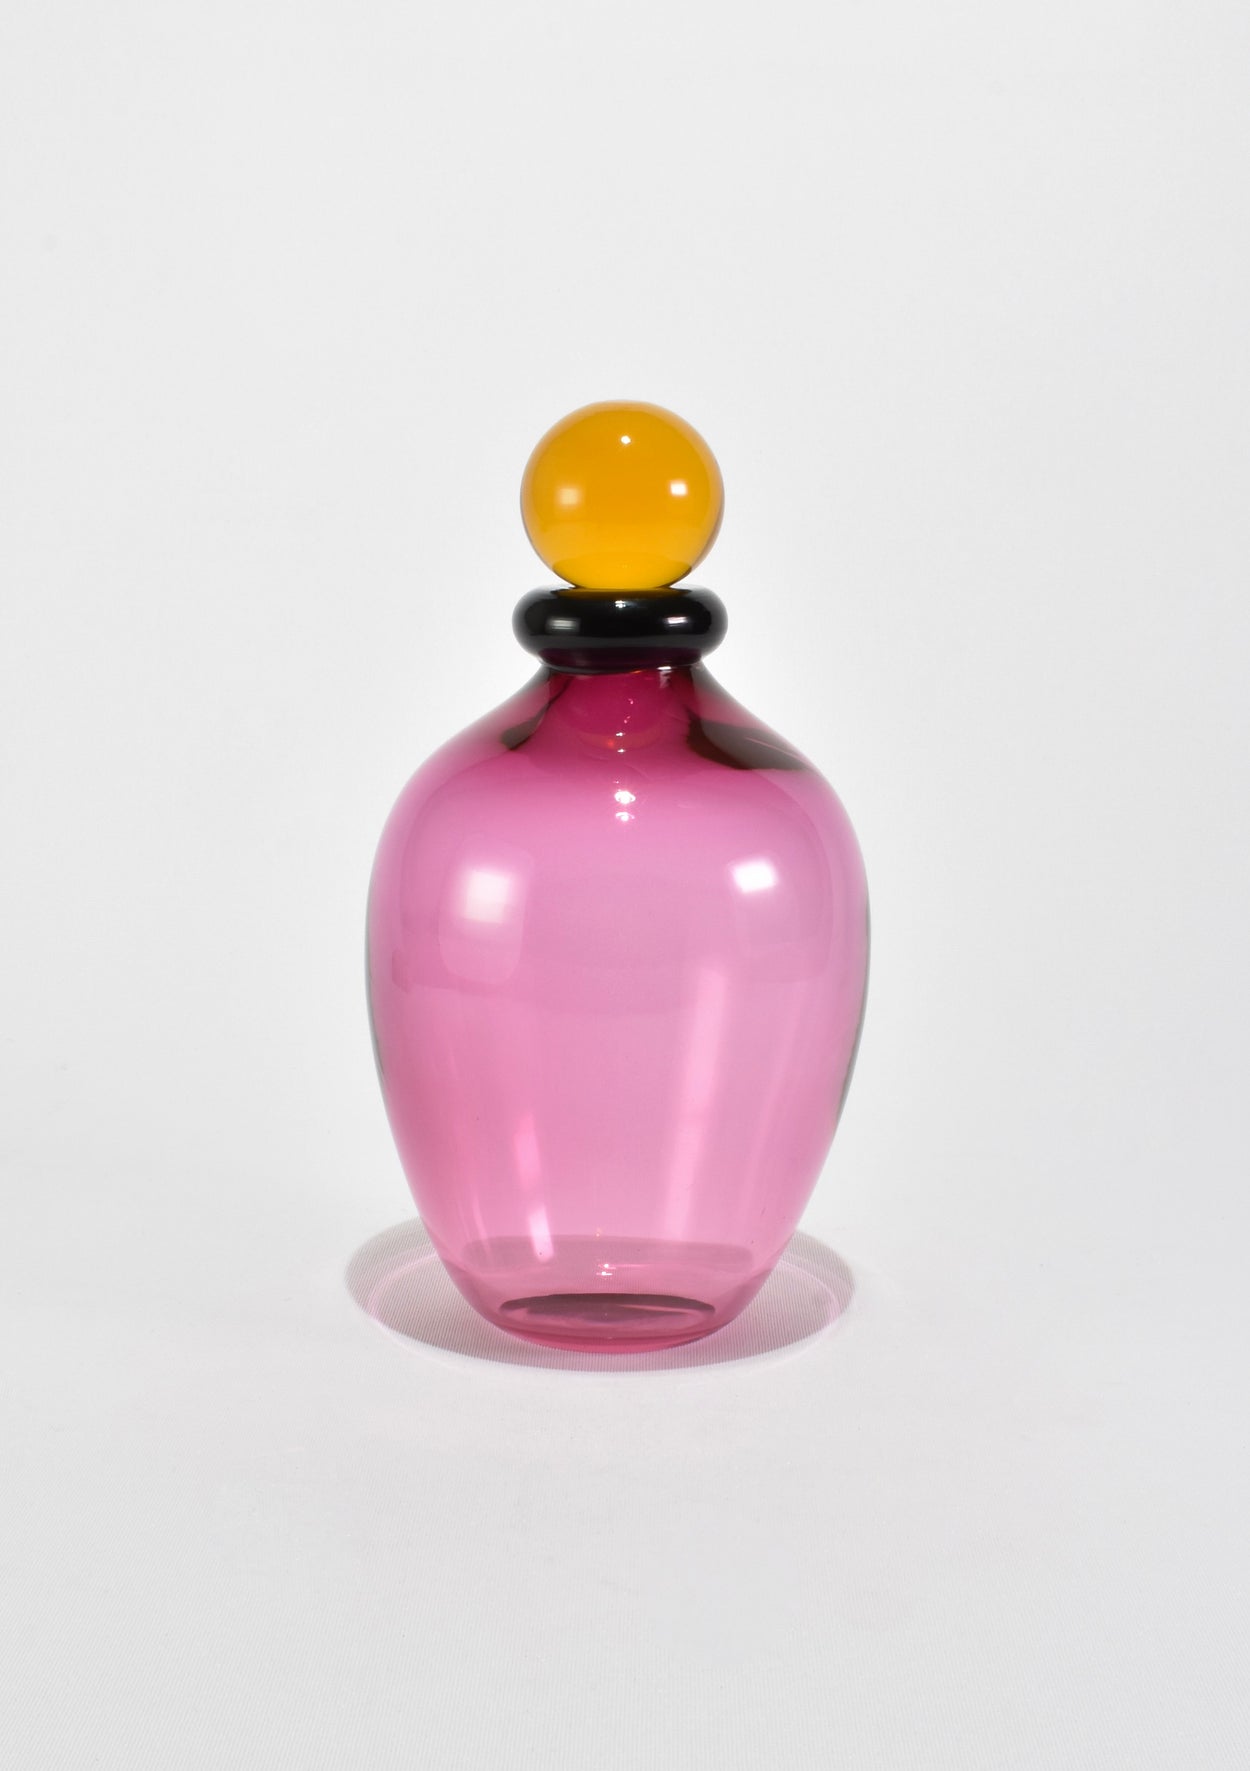 Pink Glass Decanter